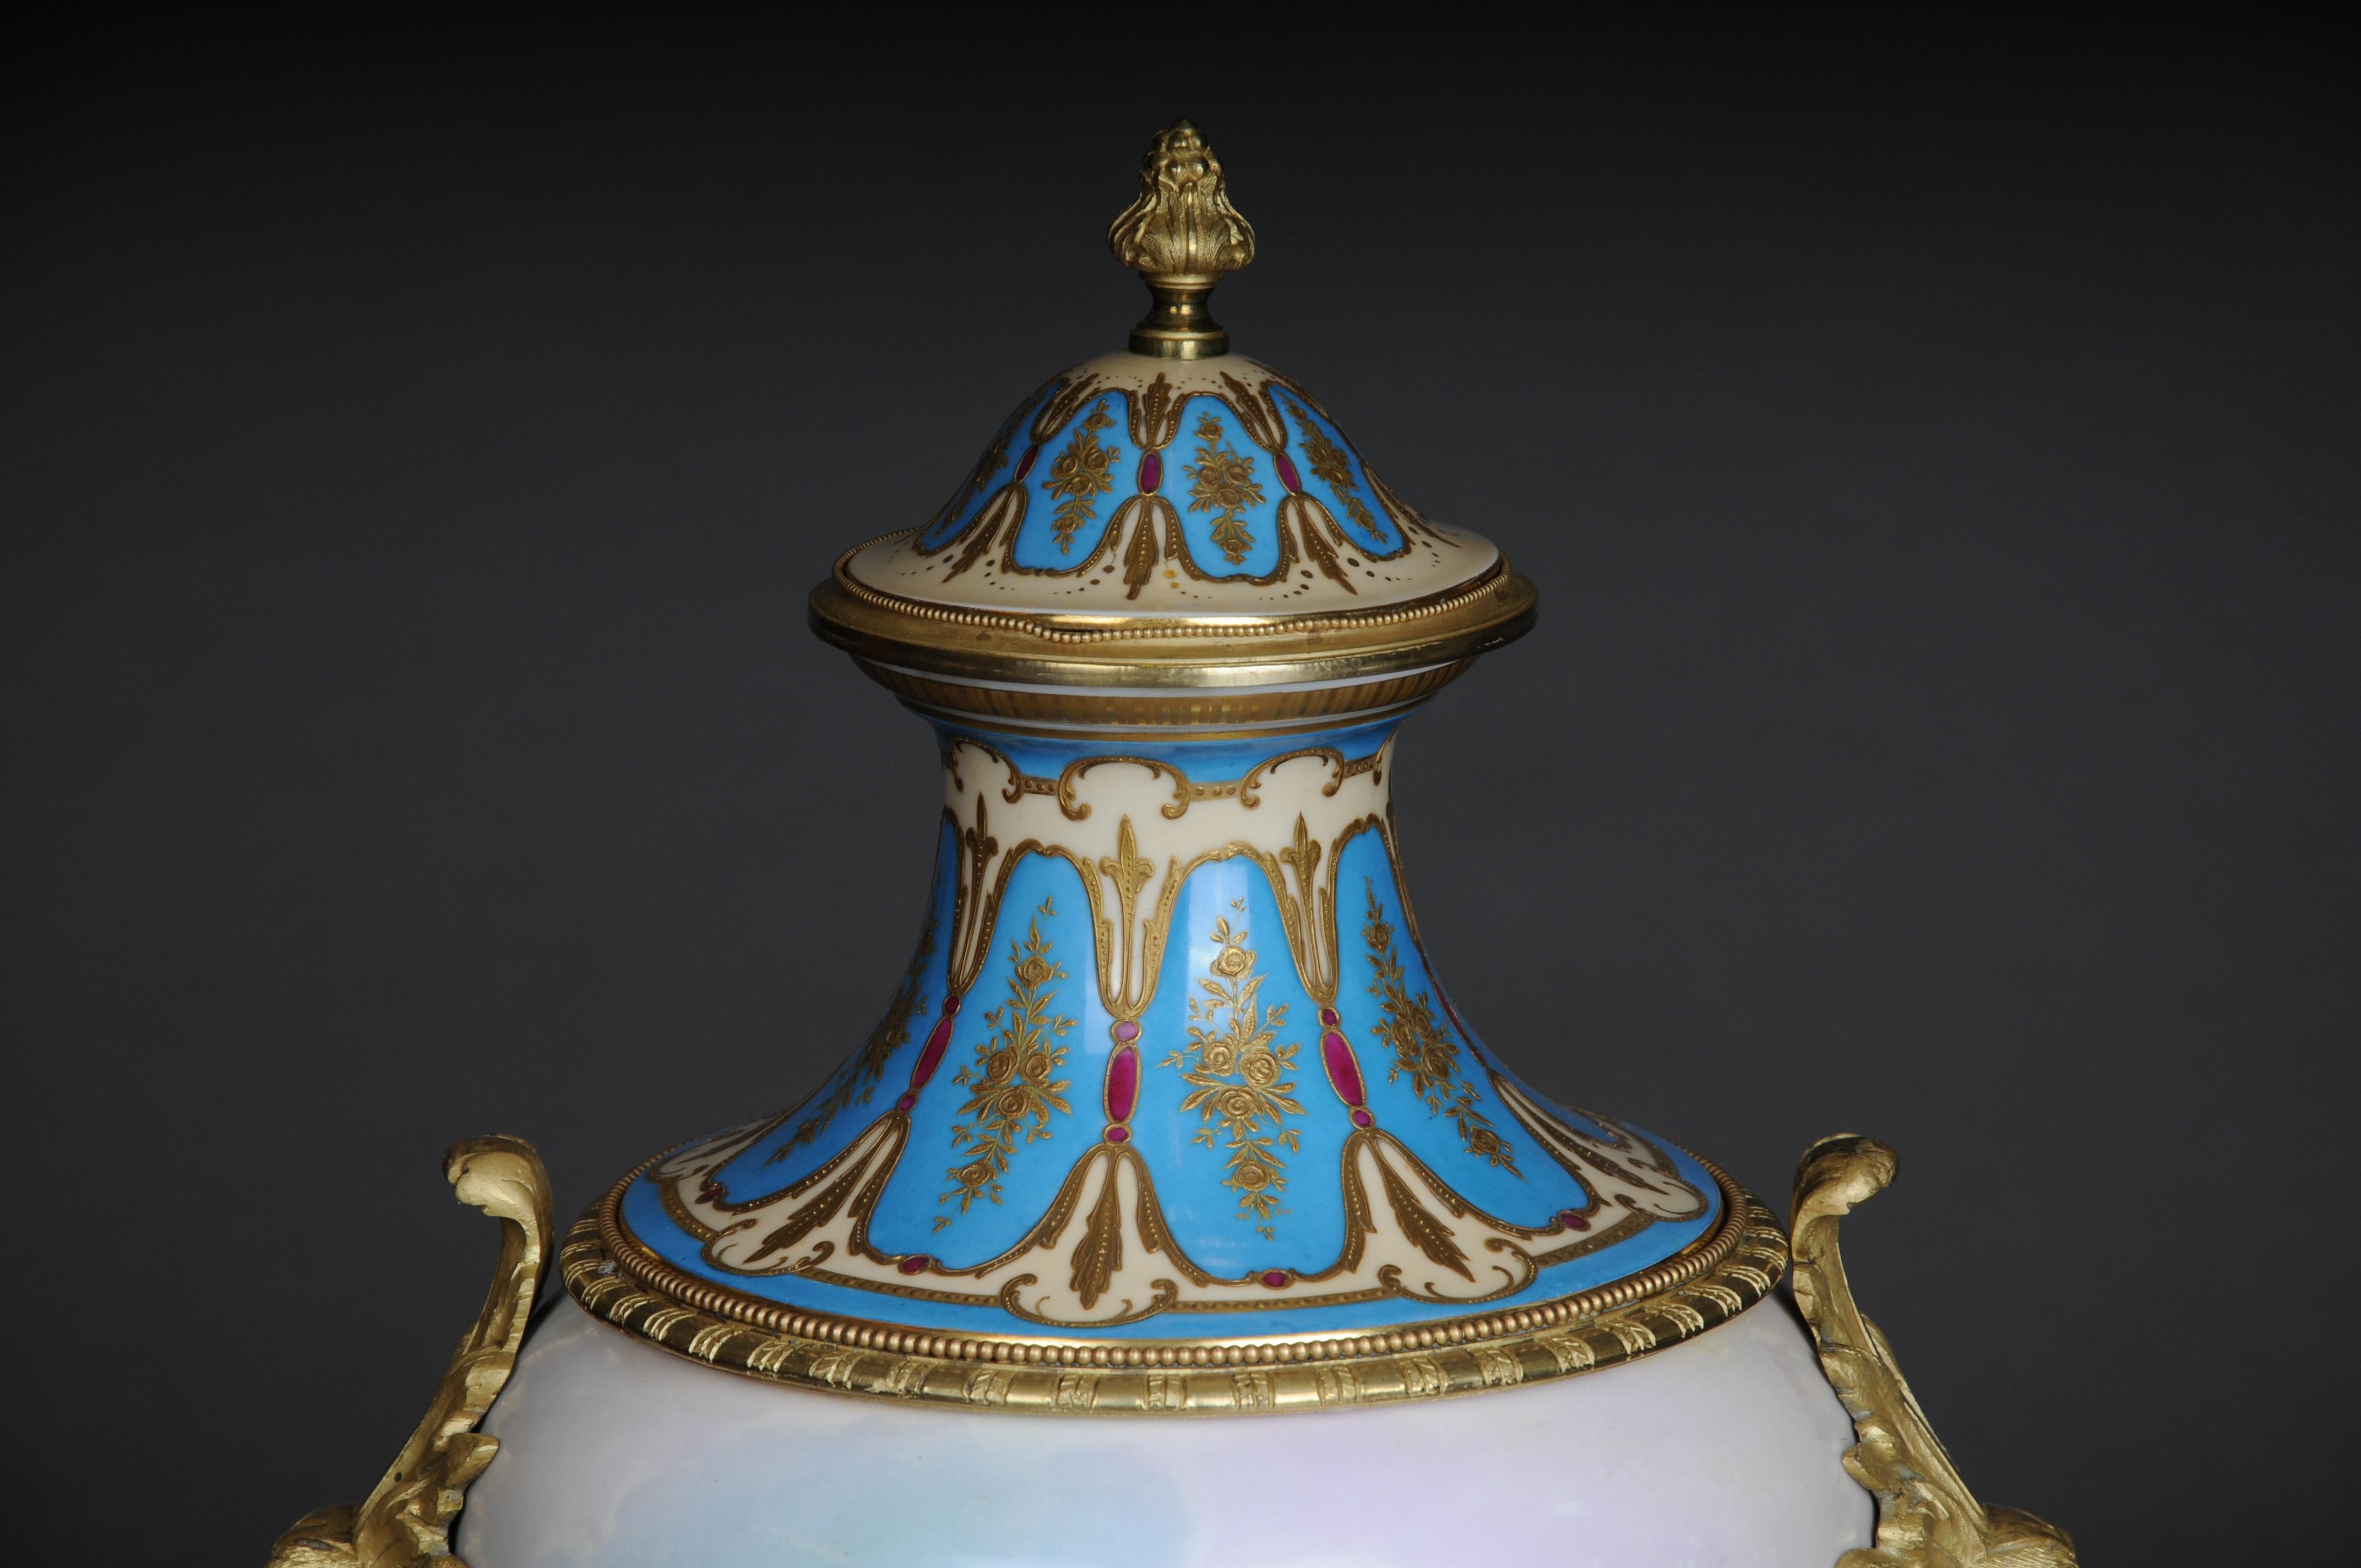 19th century monumental Sèvres pomp vase with bronze mounting

France, around 1890
Two-piece with lid. Bronze mount with a square stand, lateral women's masks and a small cone crown. Partly powder blue background with relief gold and red enamel.